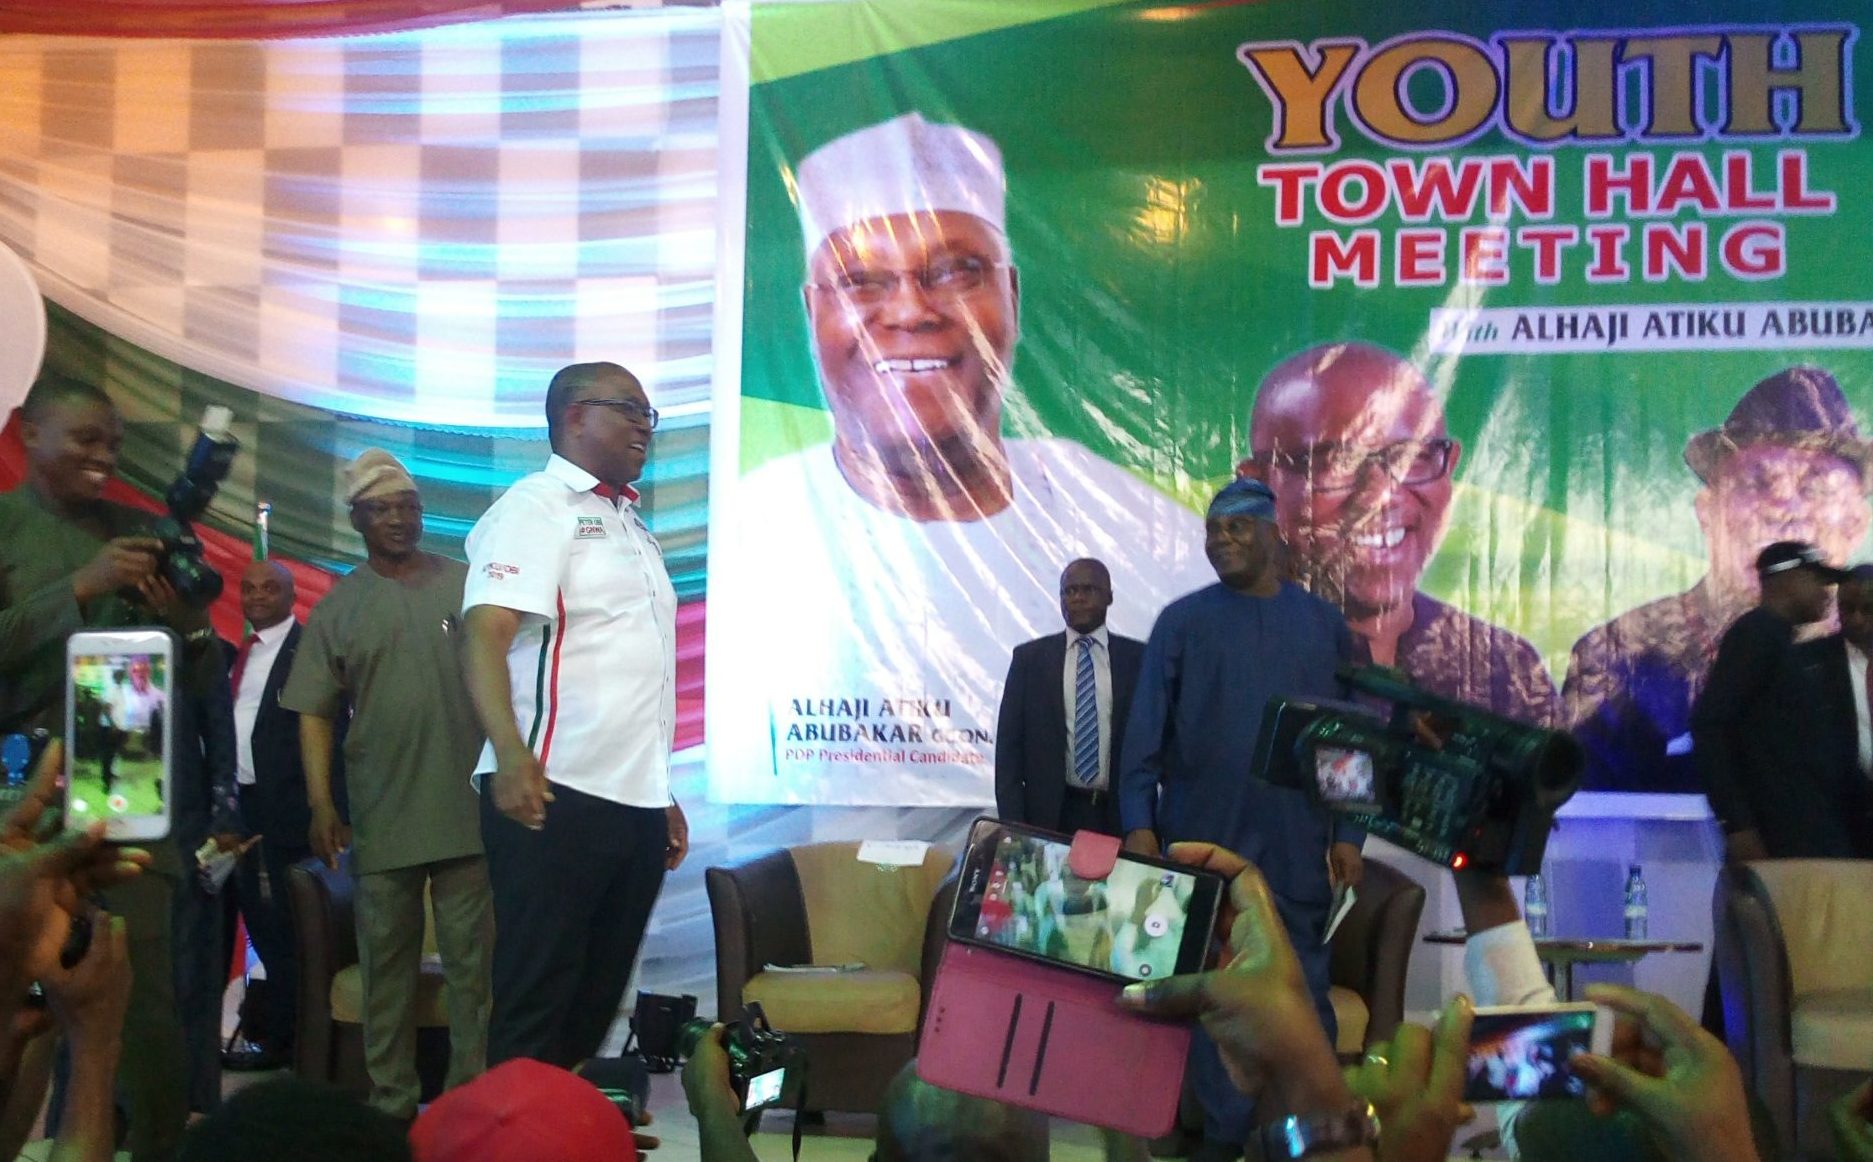 Breaking: PDP Presidential candidate, Atiku Abubakar, arrive for Town Hall meeting with youth supporters in Lagos (Photos)